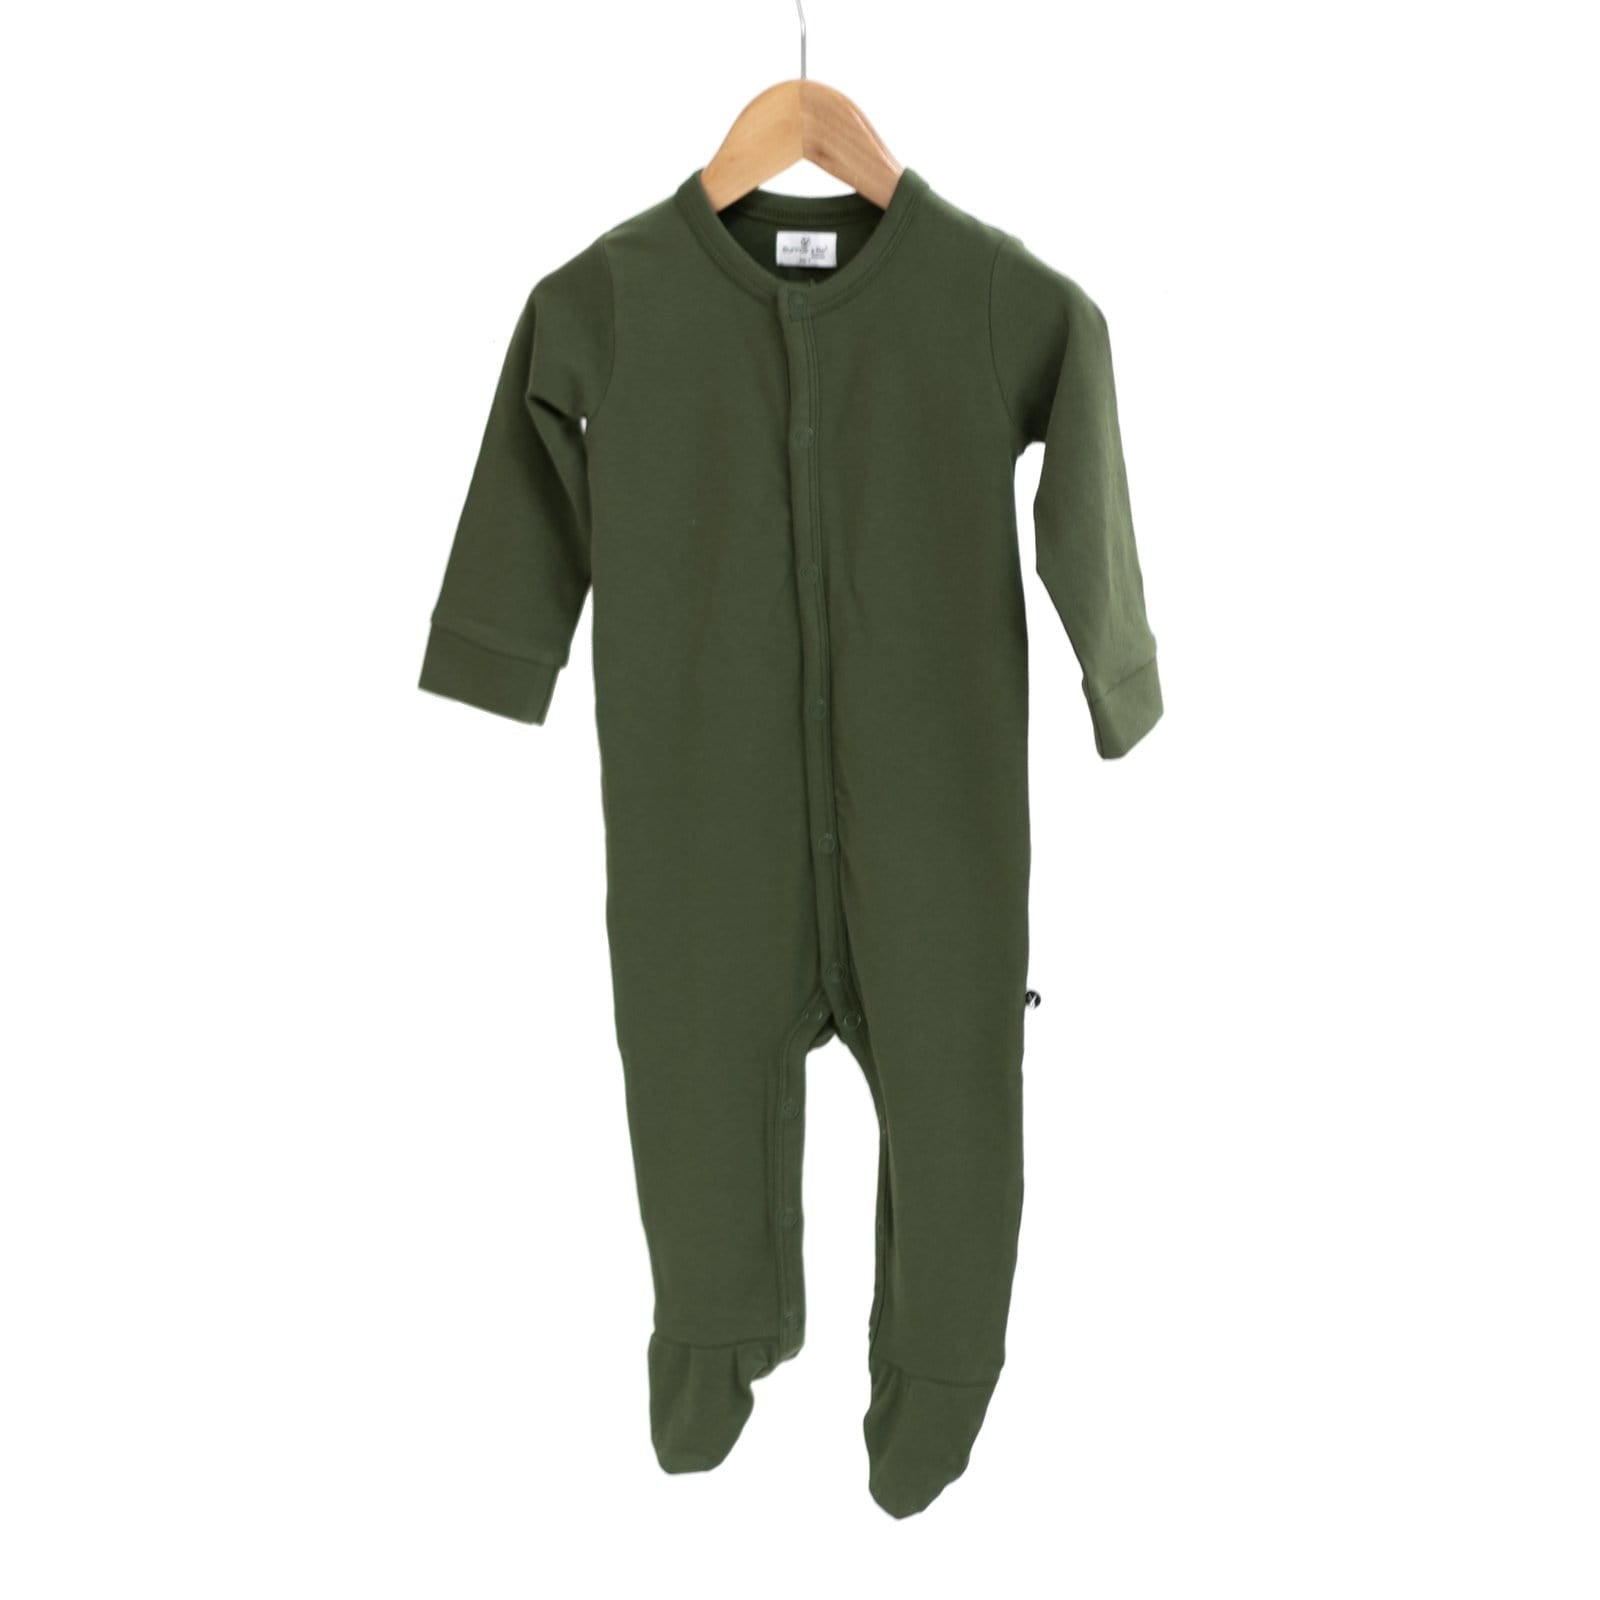 Burrow & Be Unisex Outfit Pine / NB Organic Essentials Sleep Suit